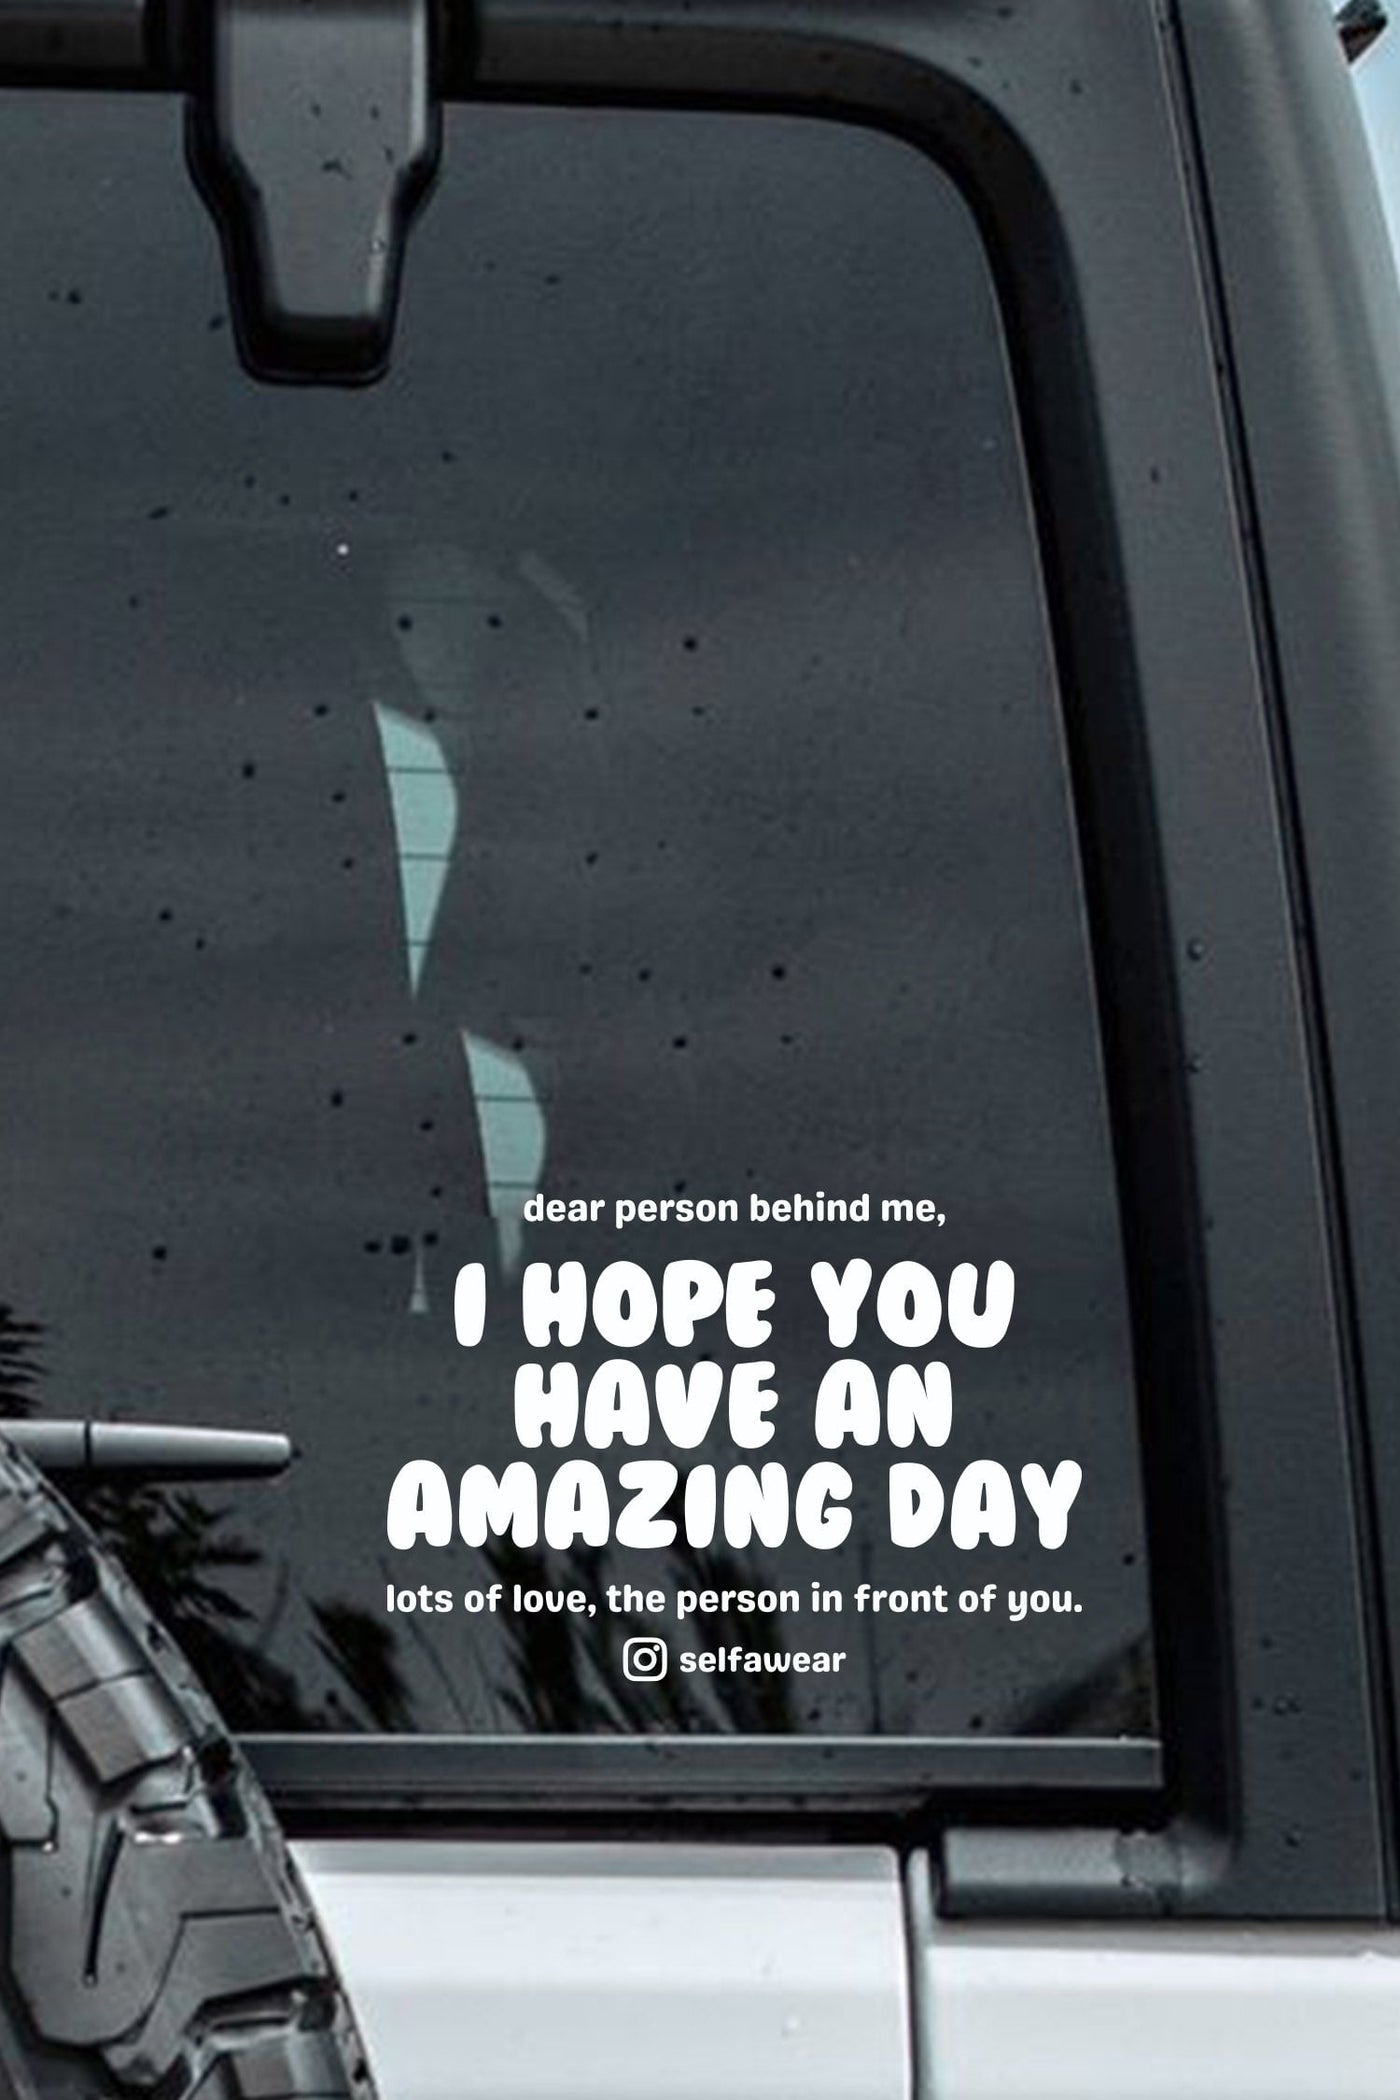 HAVE AN AMAZING DAY. - Positive Driving Car Sticker Affirmation Stickers Selfawear 